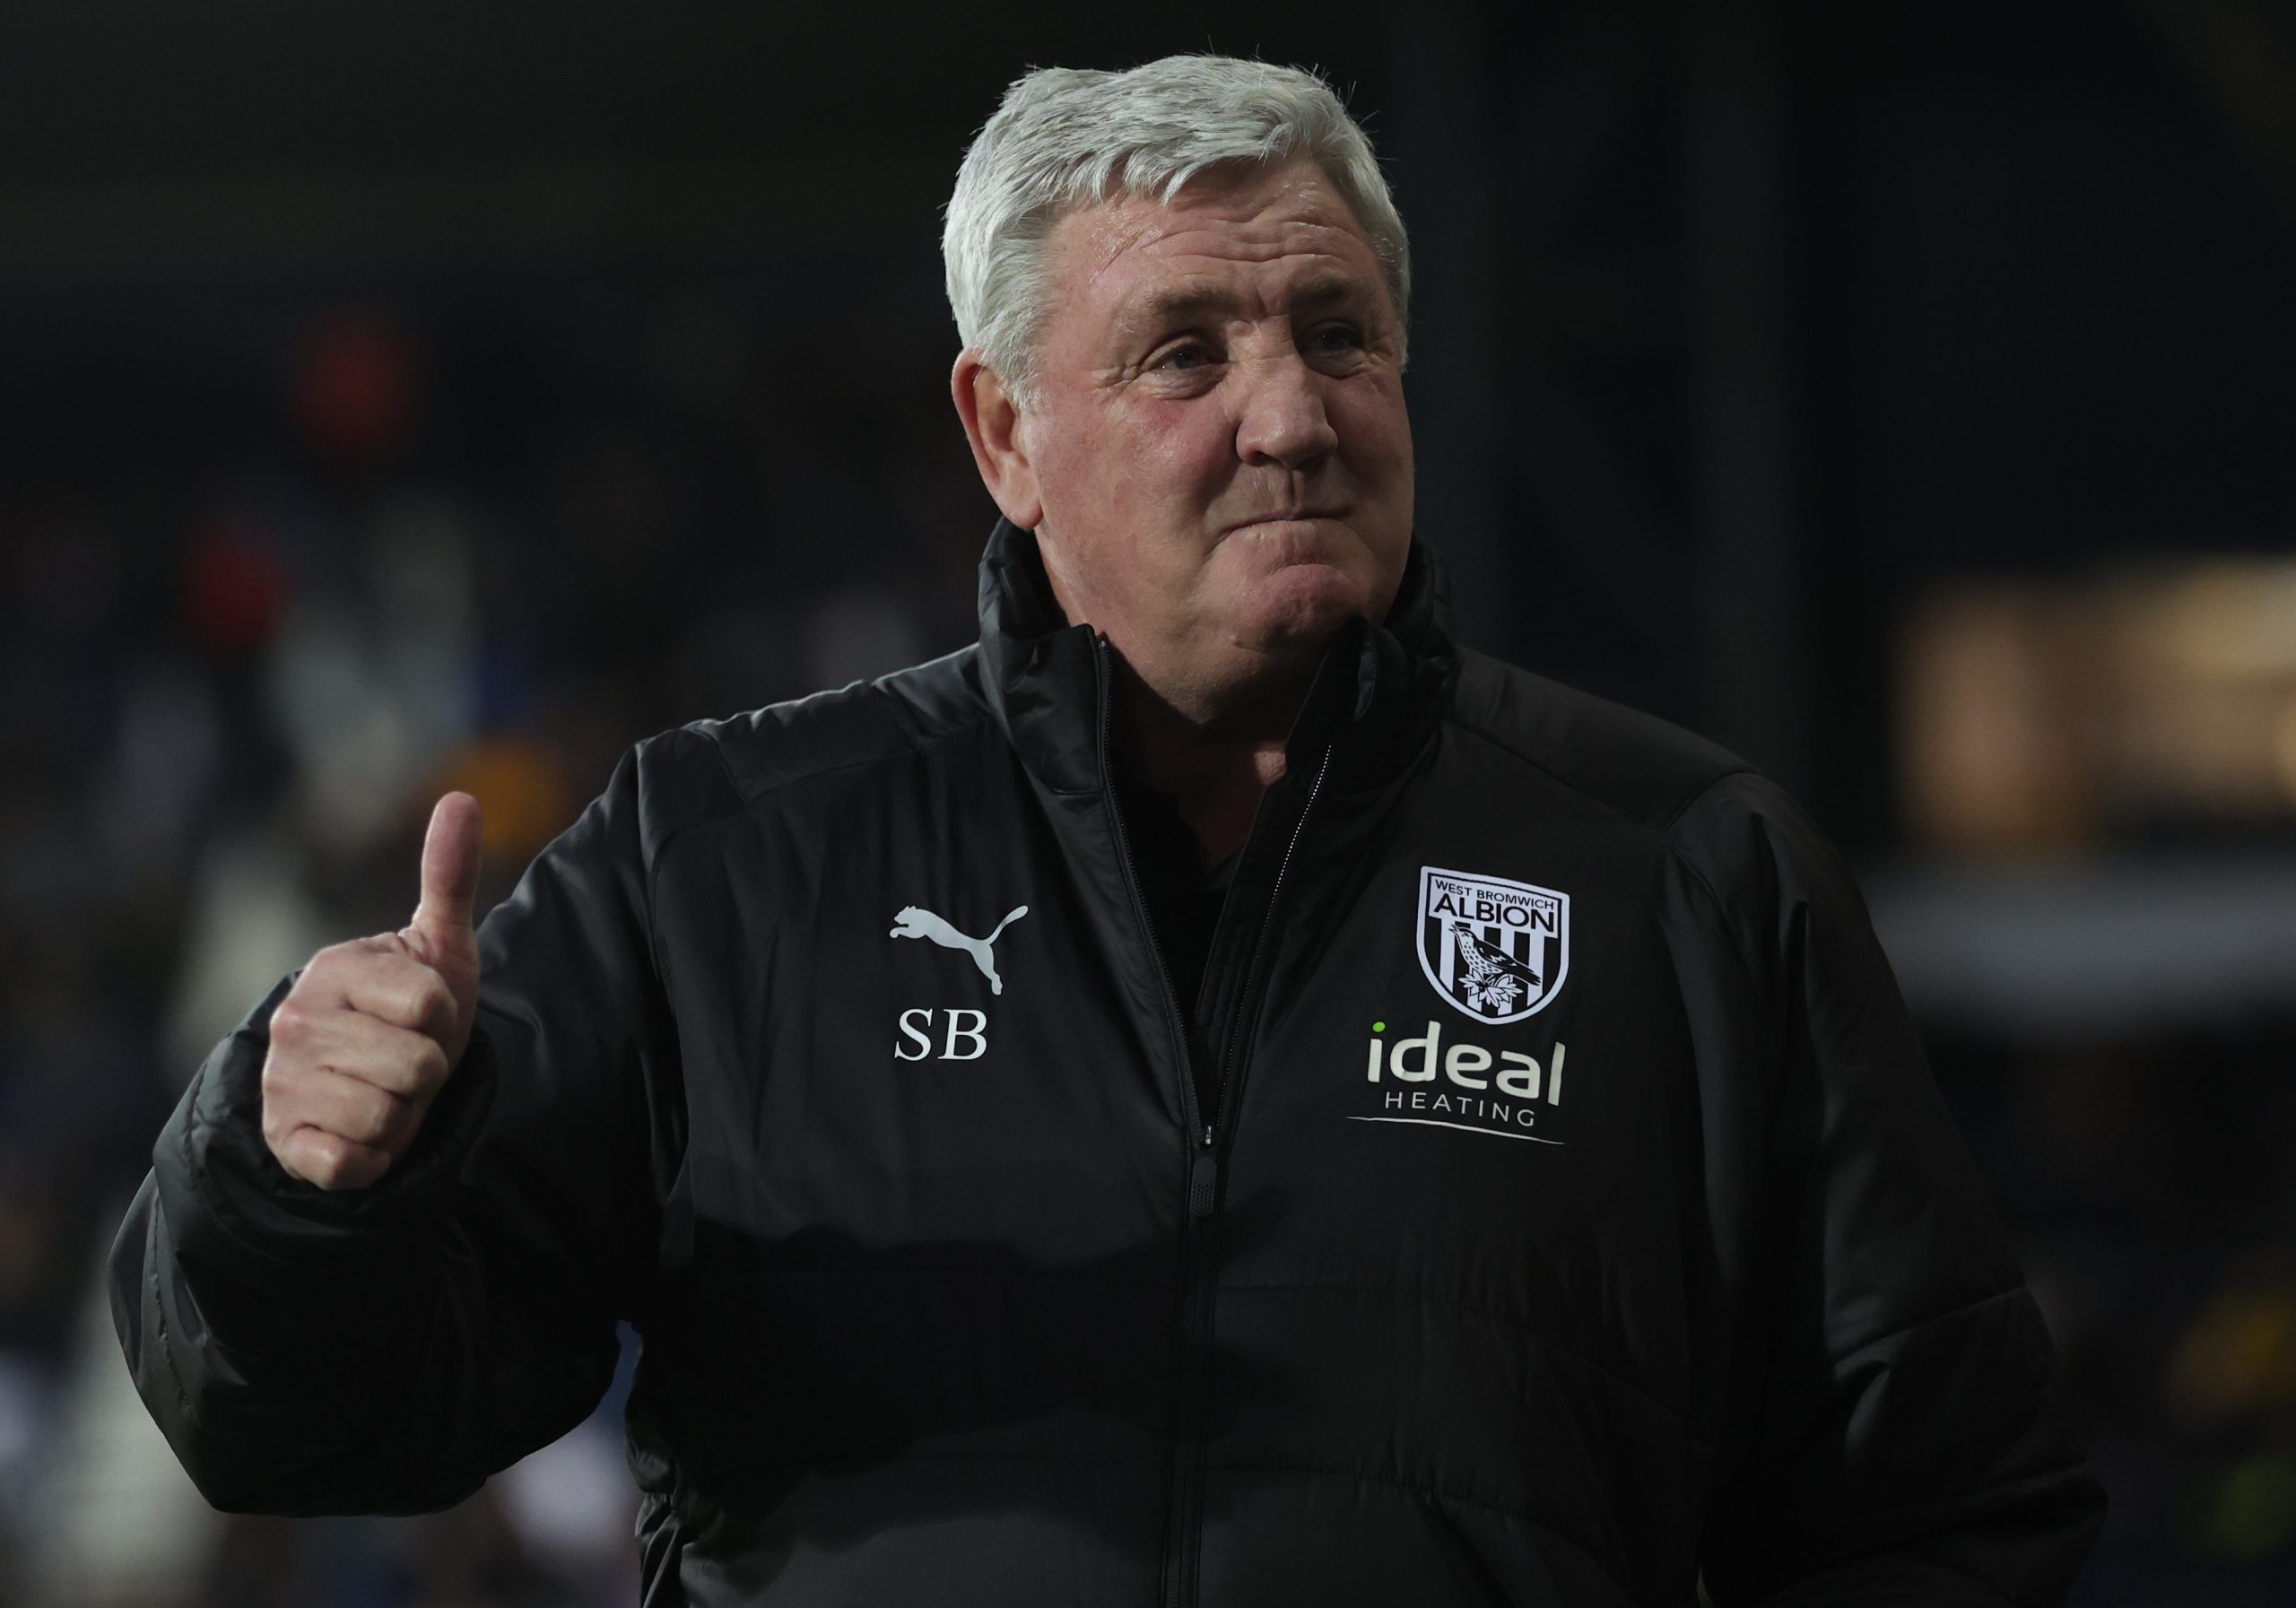 steve-bruce-west-brom-transfer-news-championship-jed-wallace-john-swift-transfer-wba-secret--wba-news-hawthorns-bruce-update-pre-season-baggies-summer-signingsSoccer Football - Championship - West Bromwich Albion v AFC Bournemouth - The Hawthorns, West Bromwich, Britain - April 6, 2022 West Bromwich Albion manager Steve Bruce before the match Action Images/Carl Recine EDITORIAL USE ONLY. No use with unauthorized audio, video, data, fixture lists, club/league logos or 'live' services. Online in-m